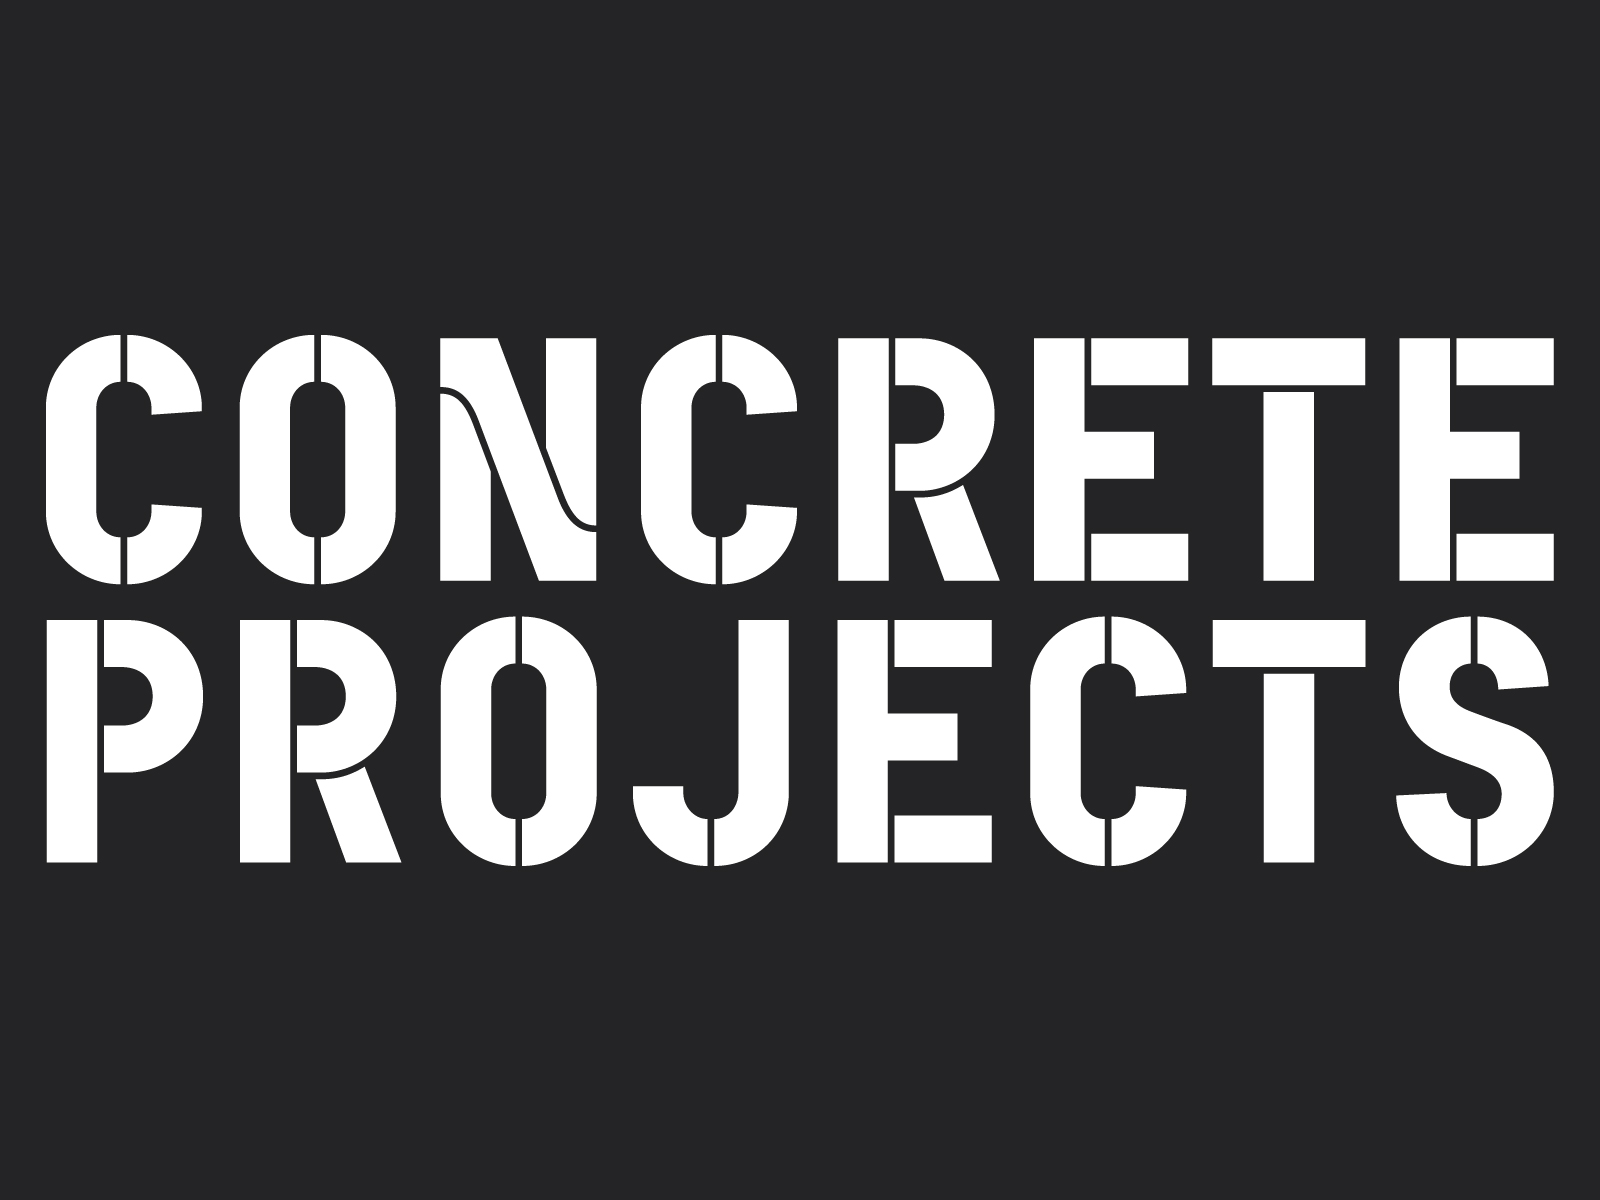 Projects - Concrete Projects